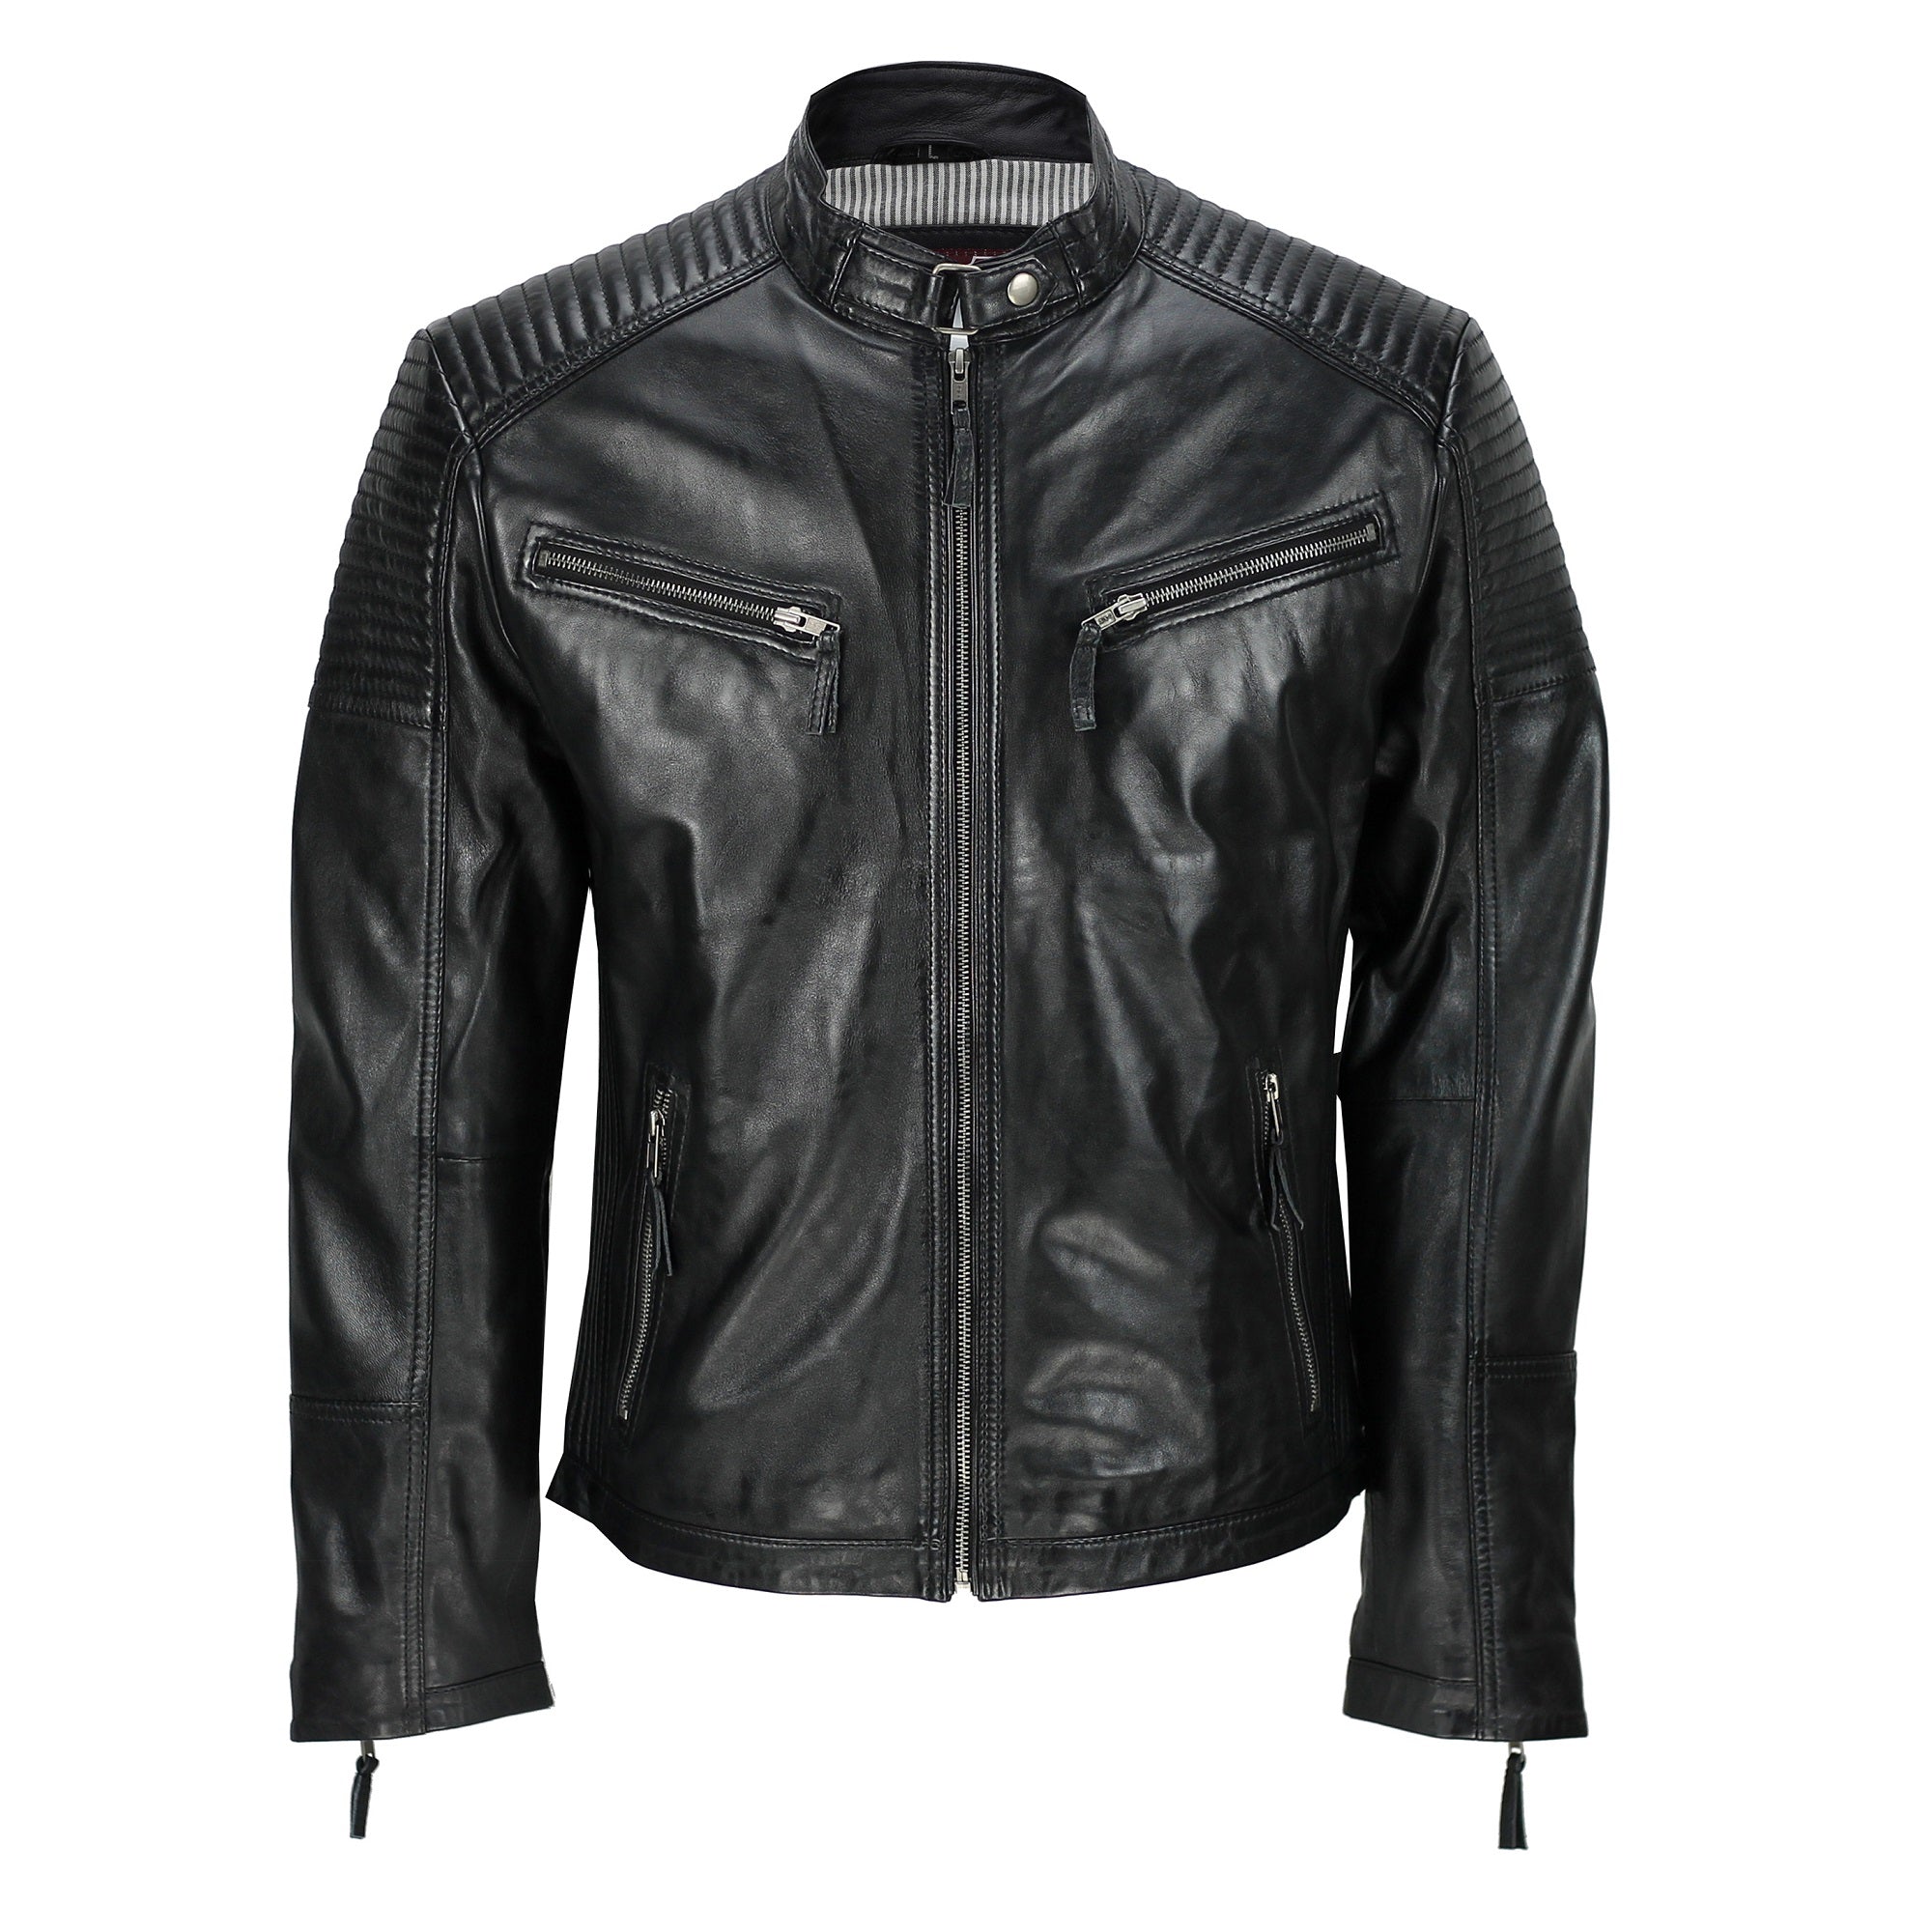 Mens New Black Real Leather Vintage Biker Style Zipped Smart Casual Retro Jacket